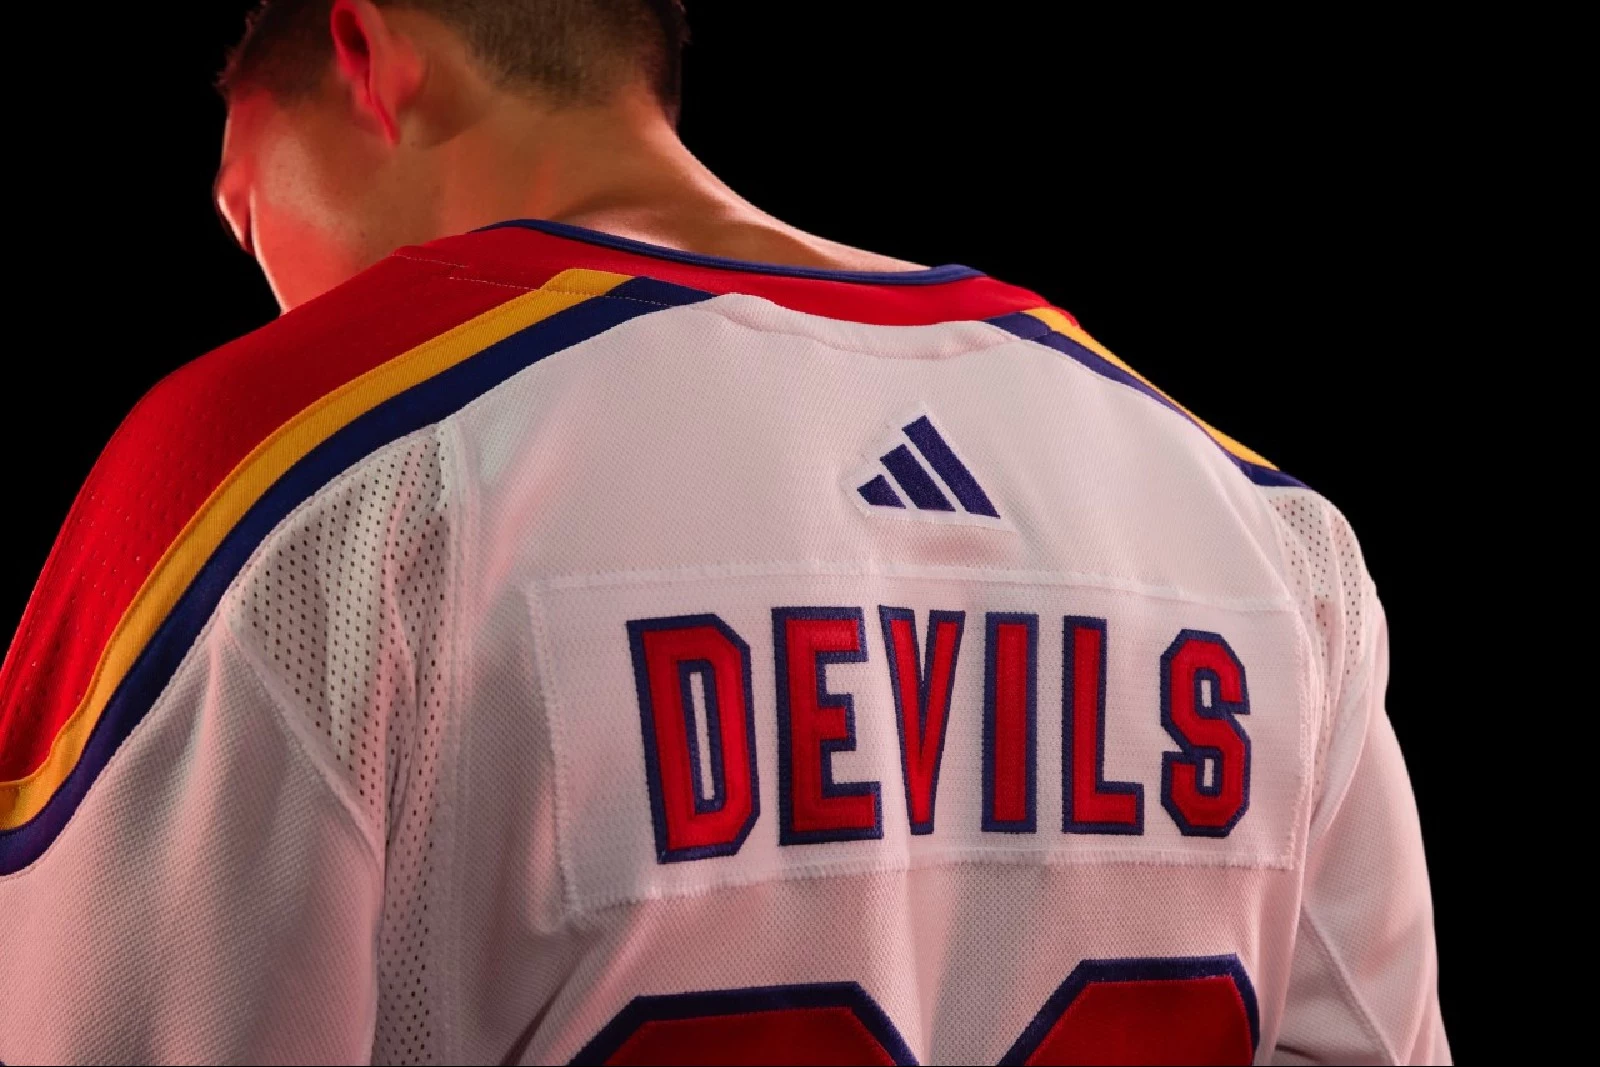 NJ Devils unveil NHL 'Reverse Retro' jersey with all-green look